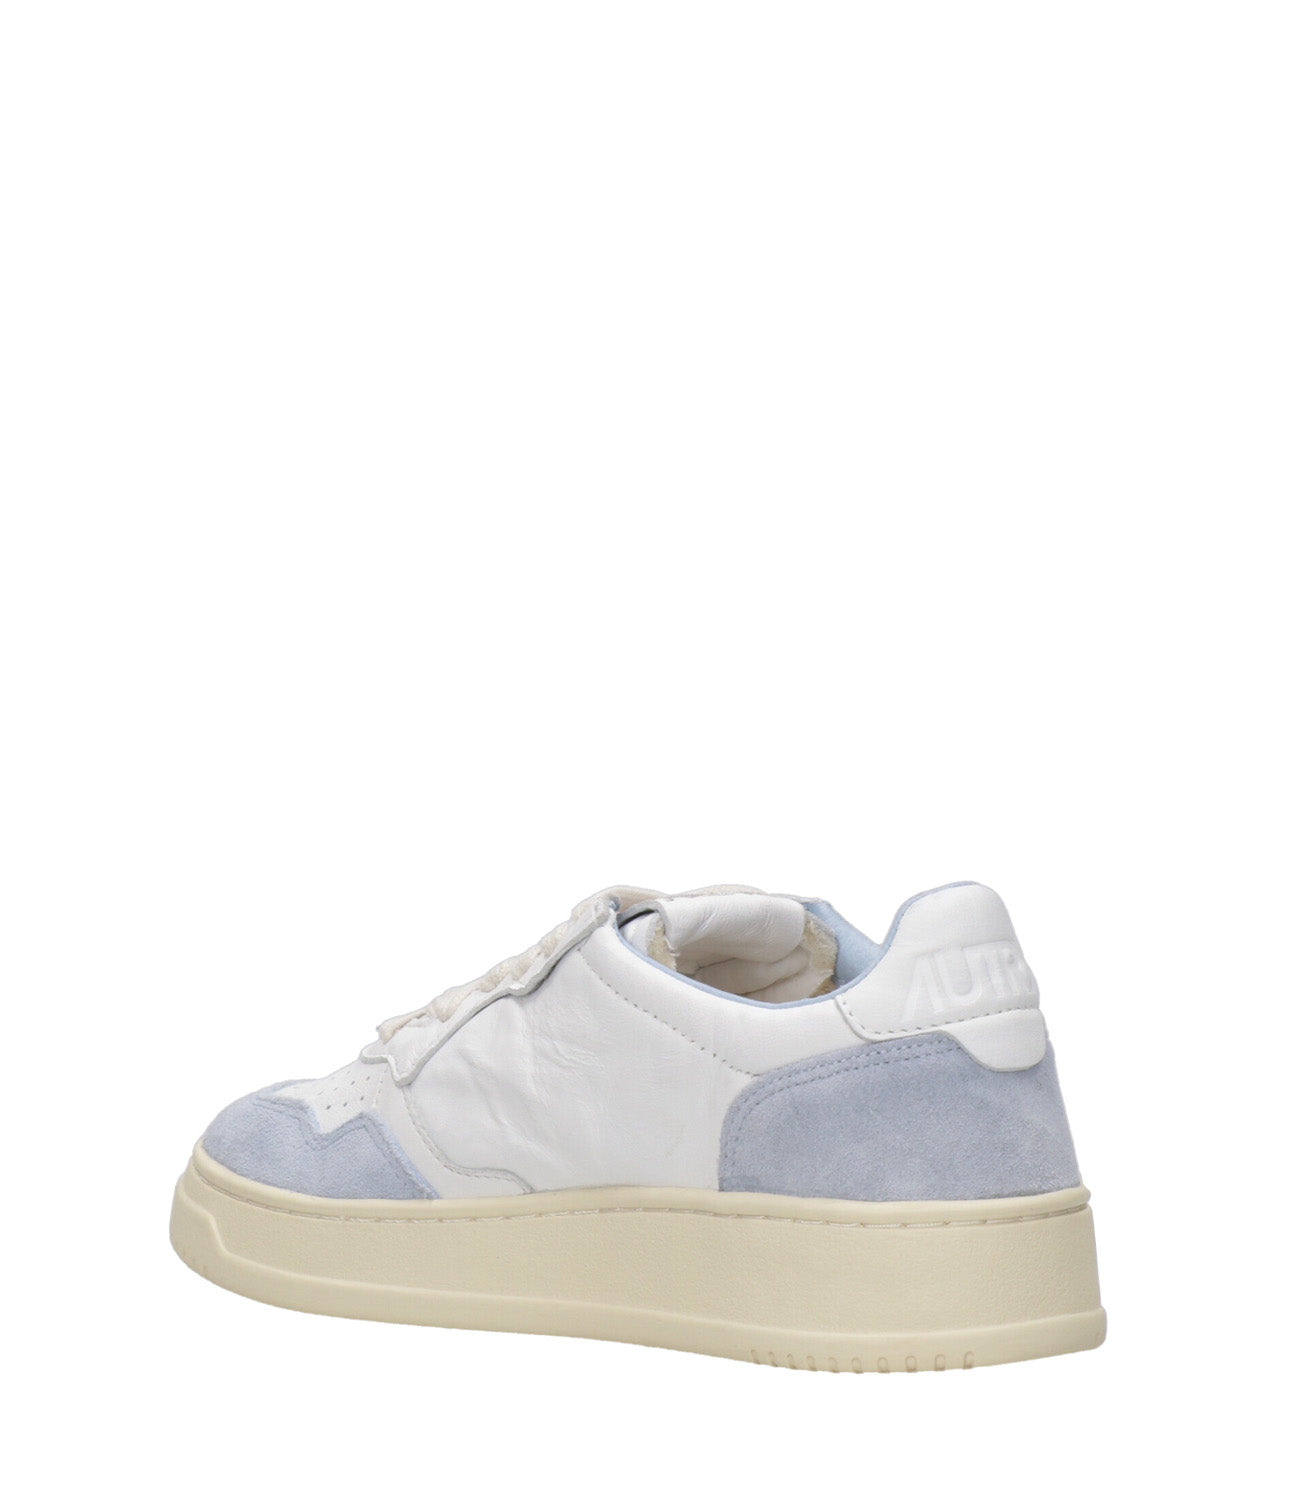 Autry | Medalist Low White and Light Blue Sneakers